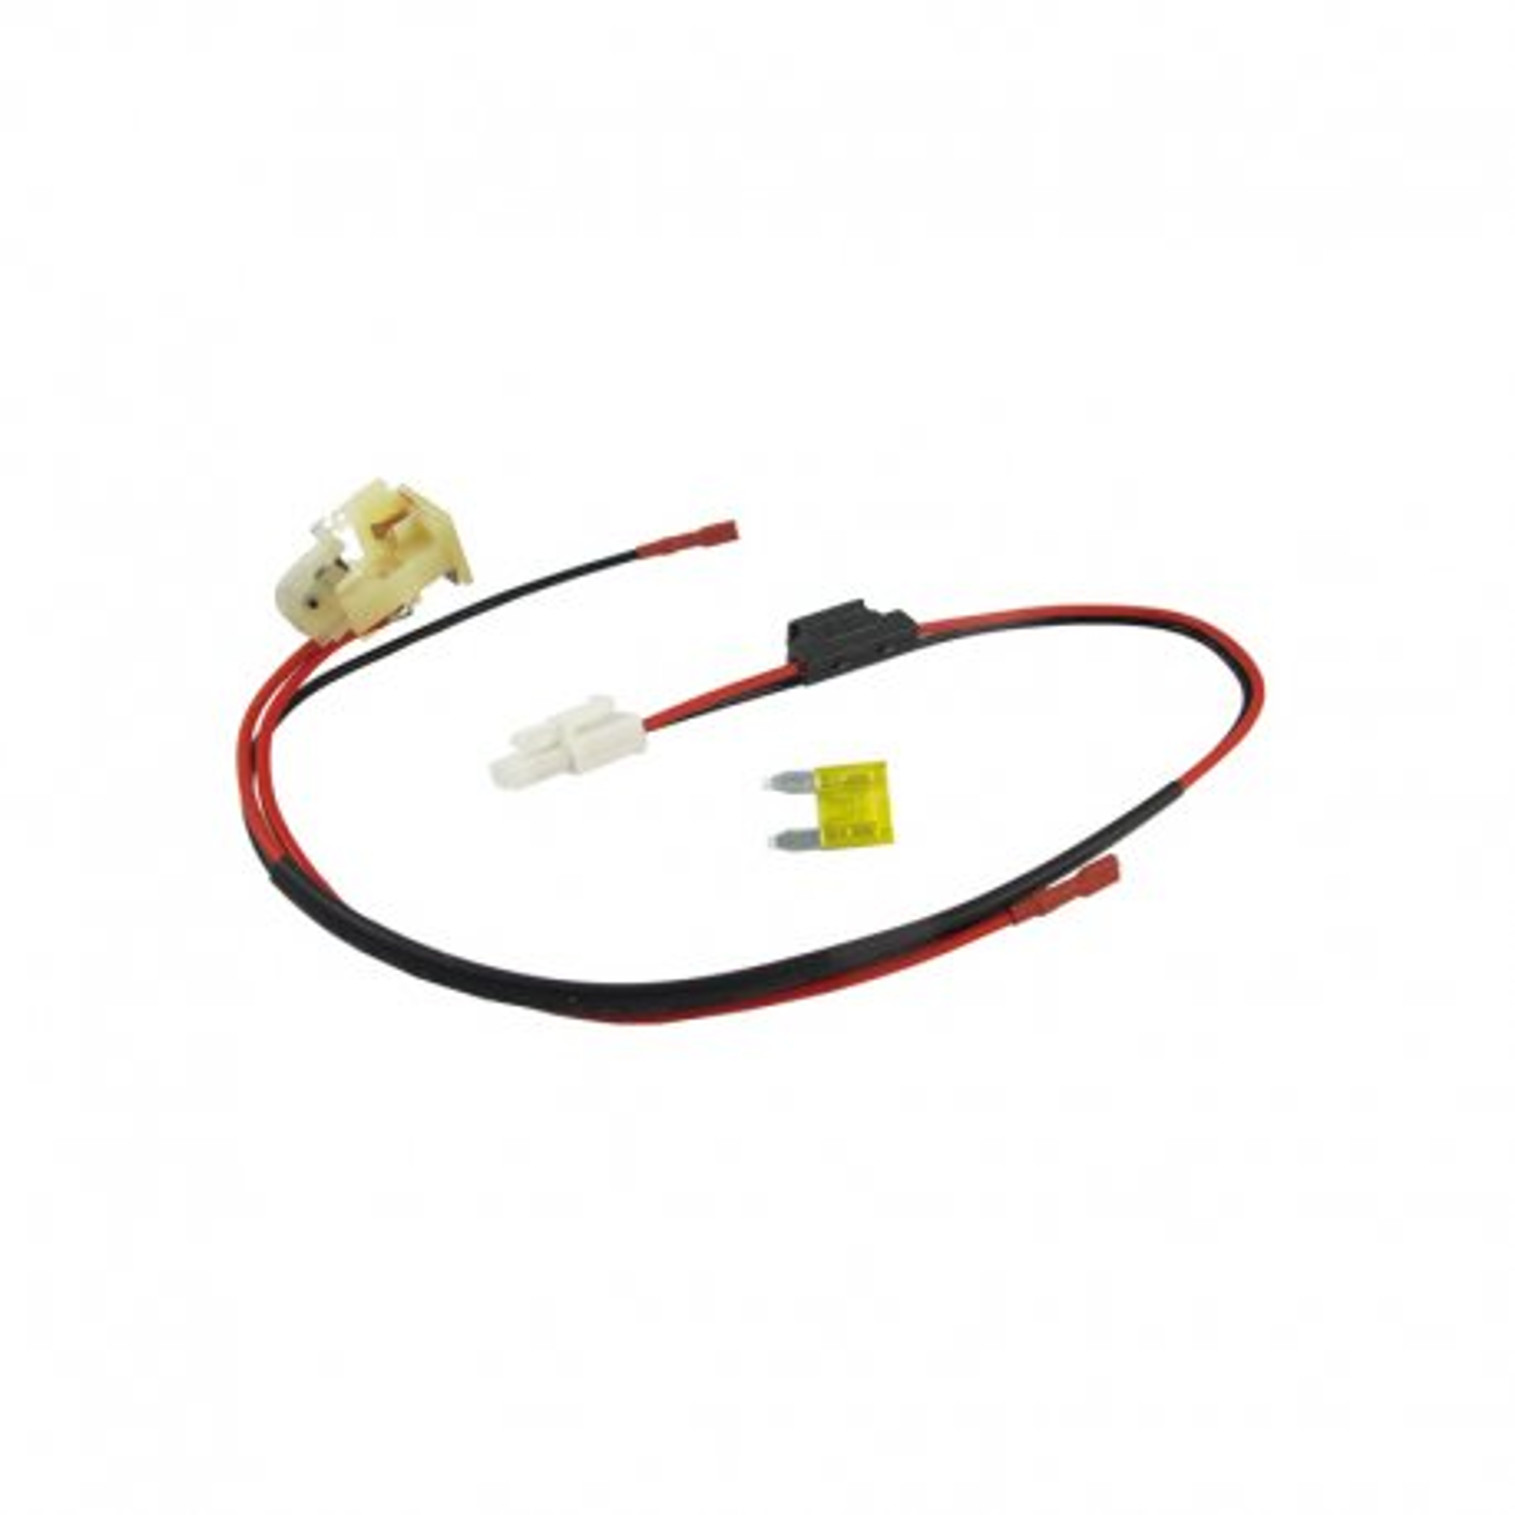 ICS EBB Rear Wired Switch Assembly Crane Stock